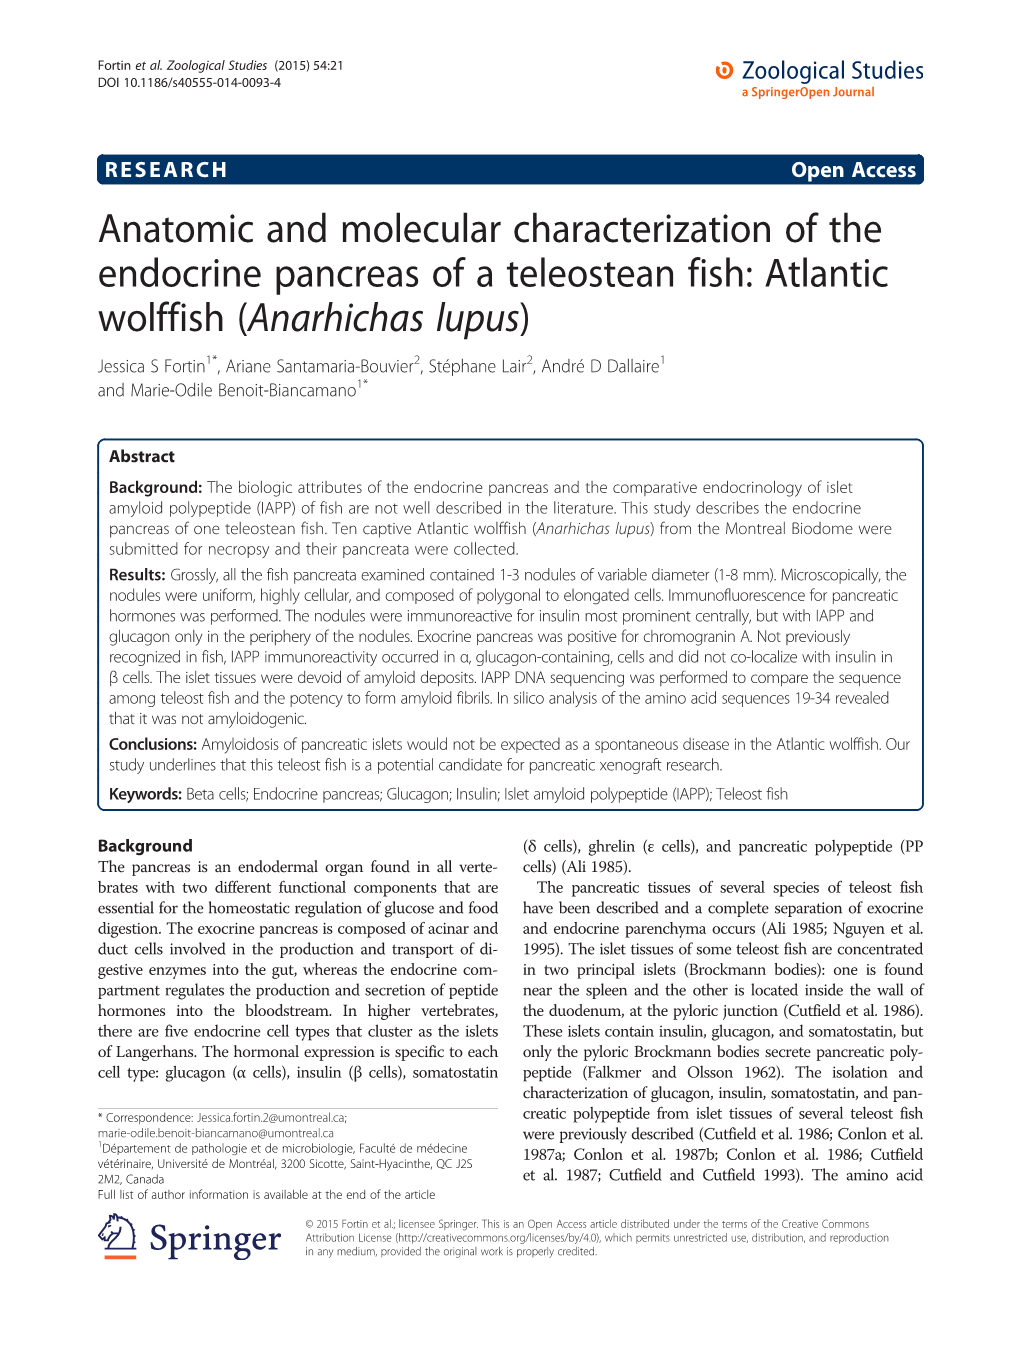 Anatomic and Molecular Characterization of the Endocrine